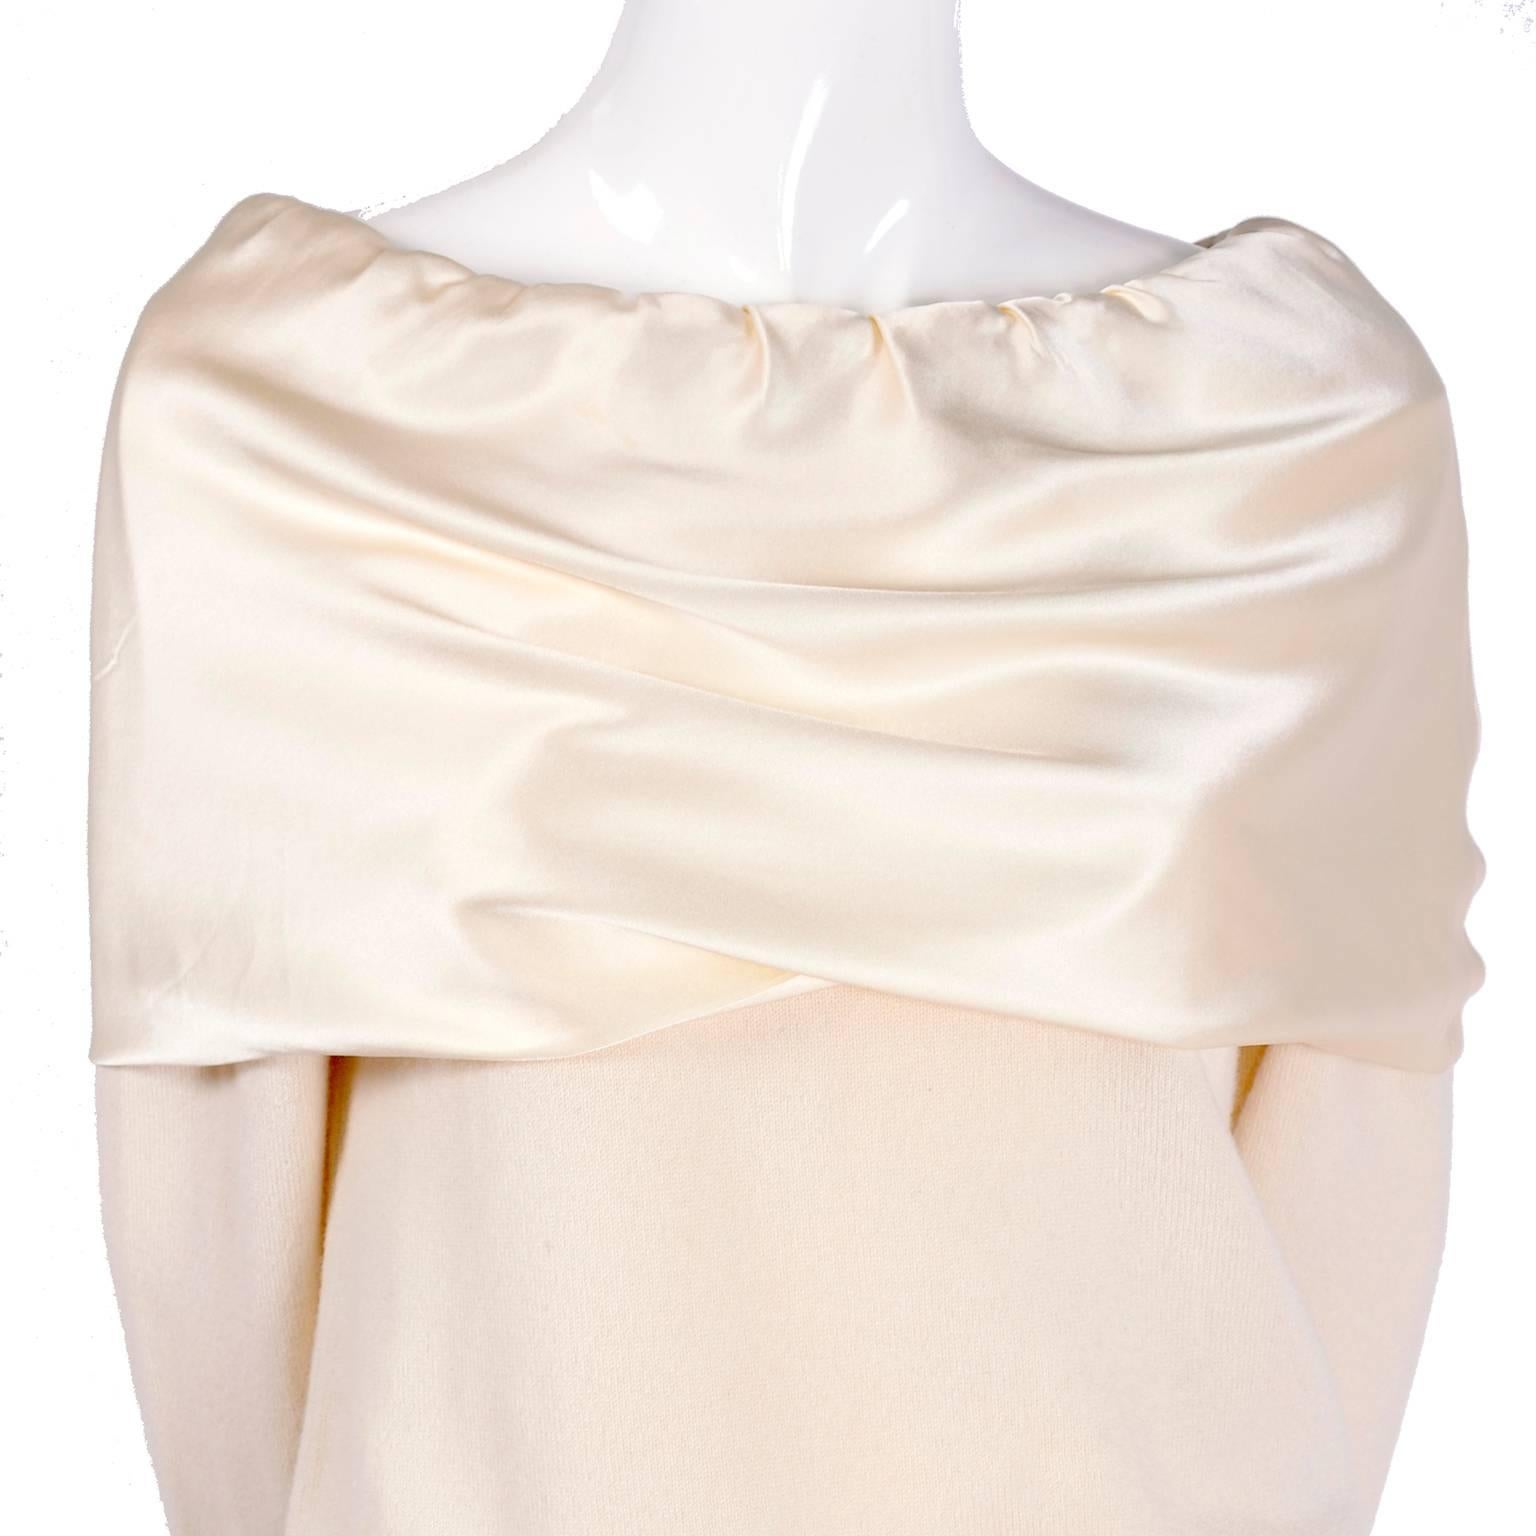 This is a fabulous cream cashmere sweater from Dolce & Gabbana with a silk satin shoulder shawl 